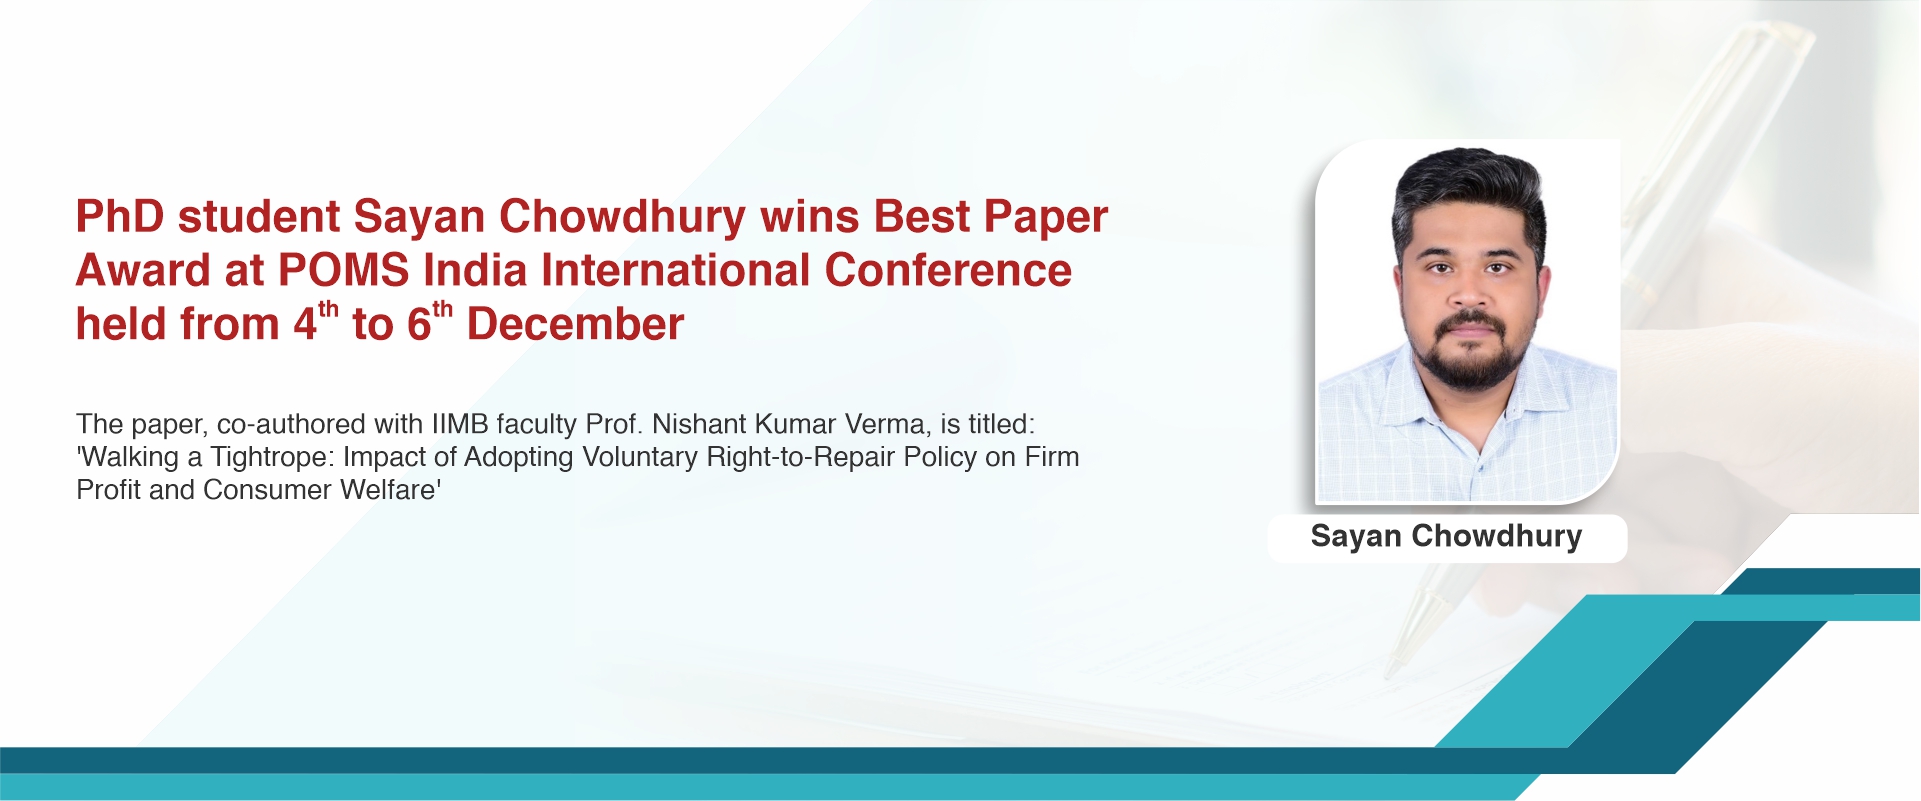 PhD Student Sayan Chowdhury wins Best Paper Award at POMS India International Conference held from 4th to 6th December